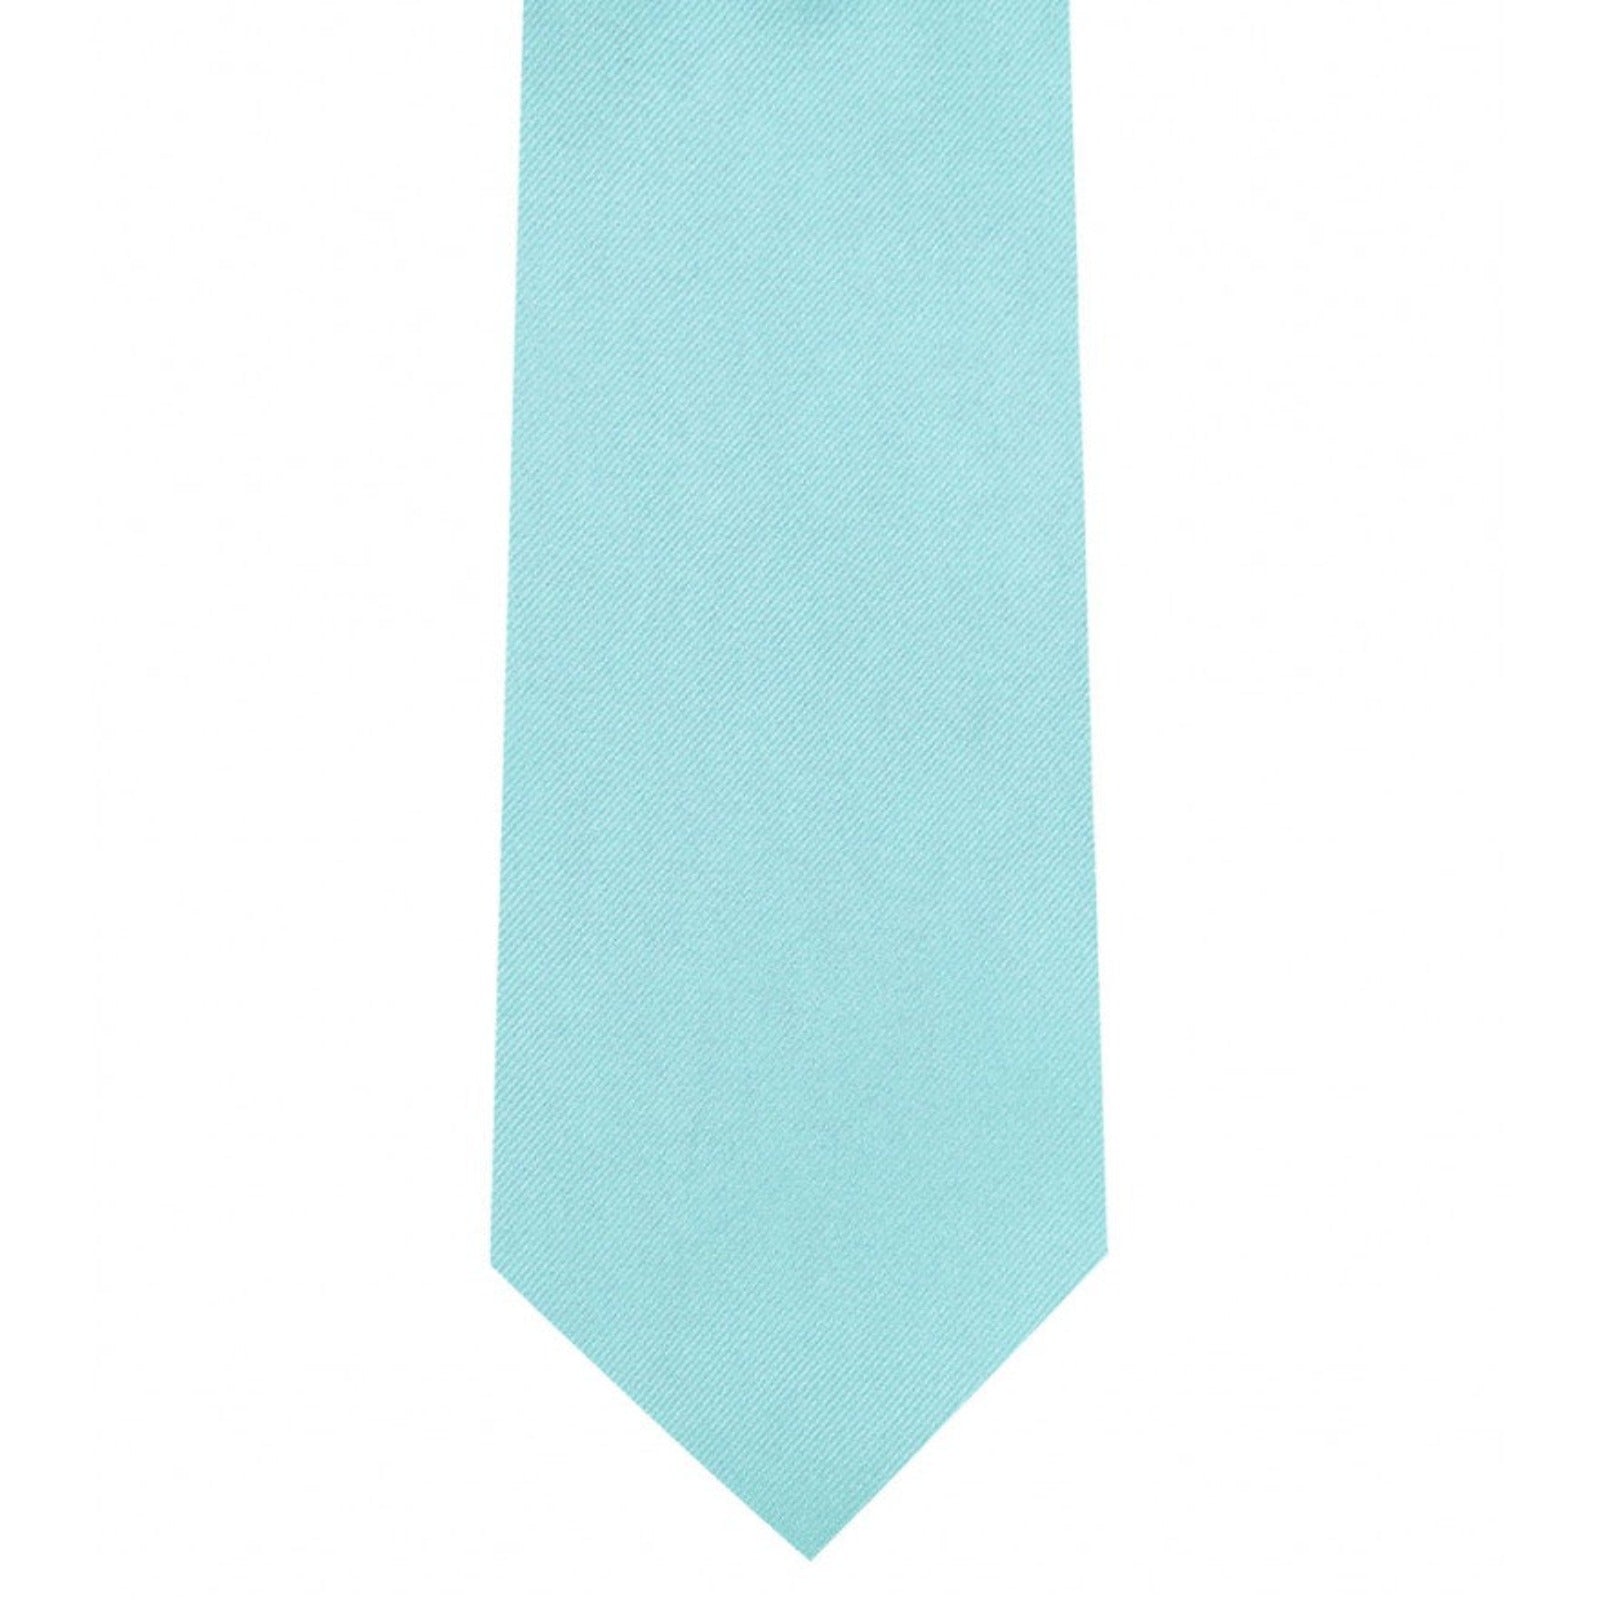 Classic Tiffany Blue Tie Ultra Skinny tie width 2.25 inches With Matching Pocket Square | KCT Menswear